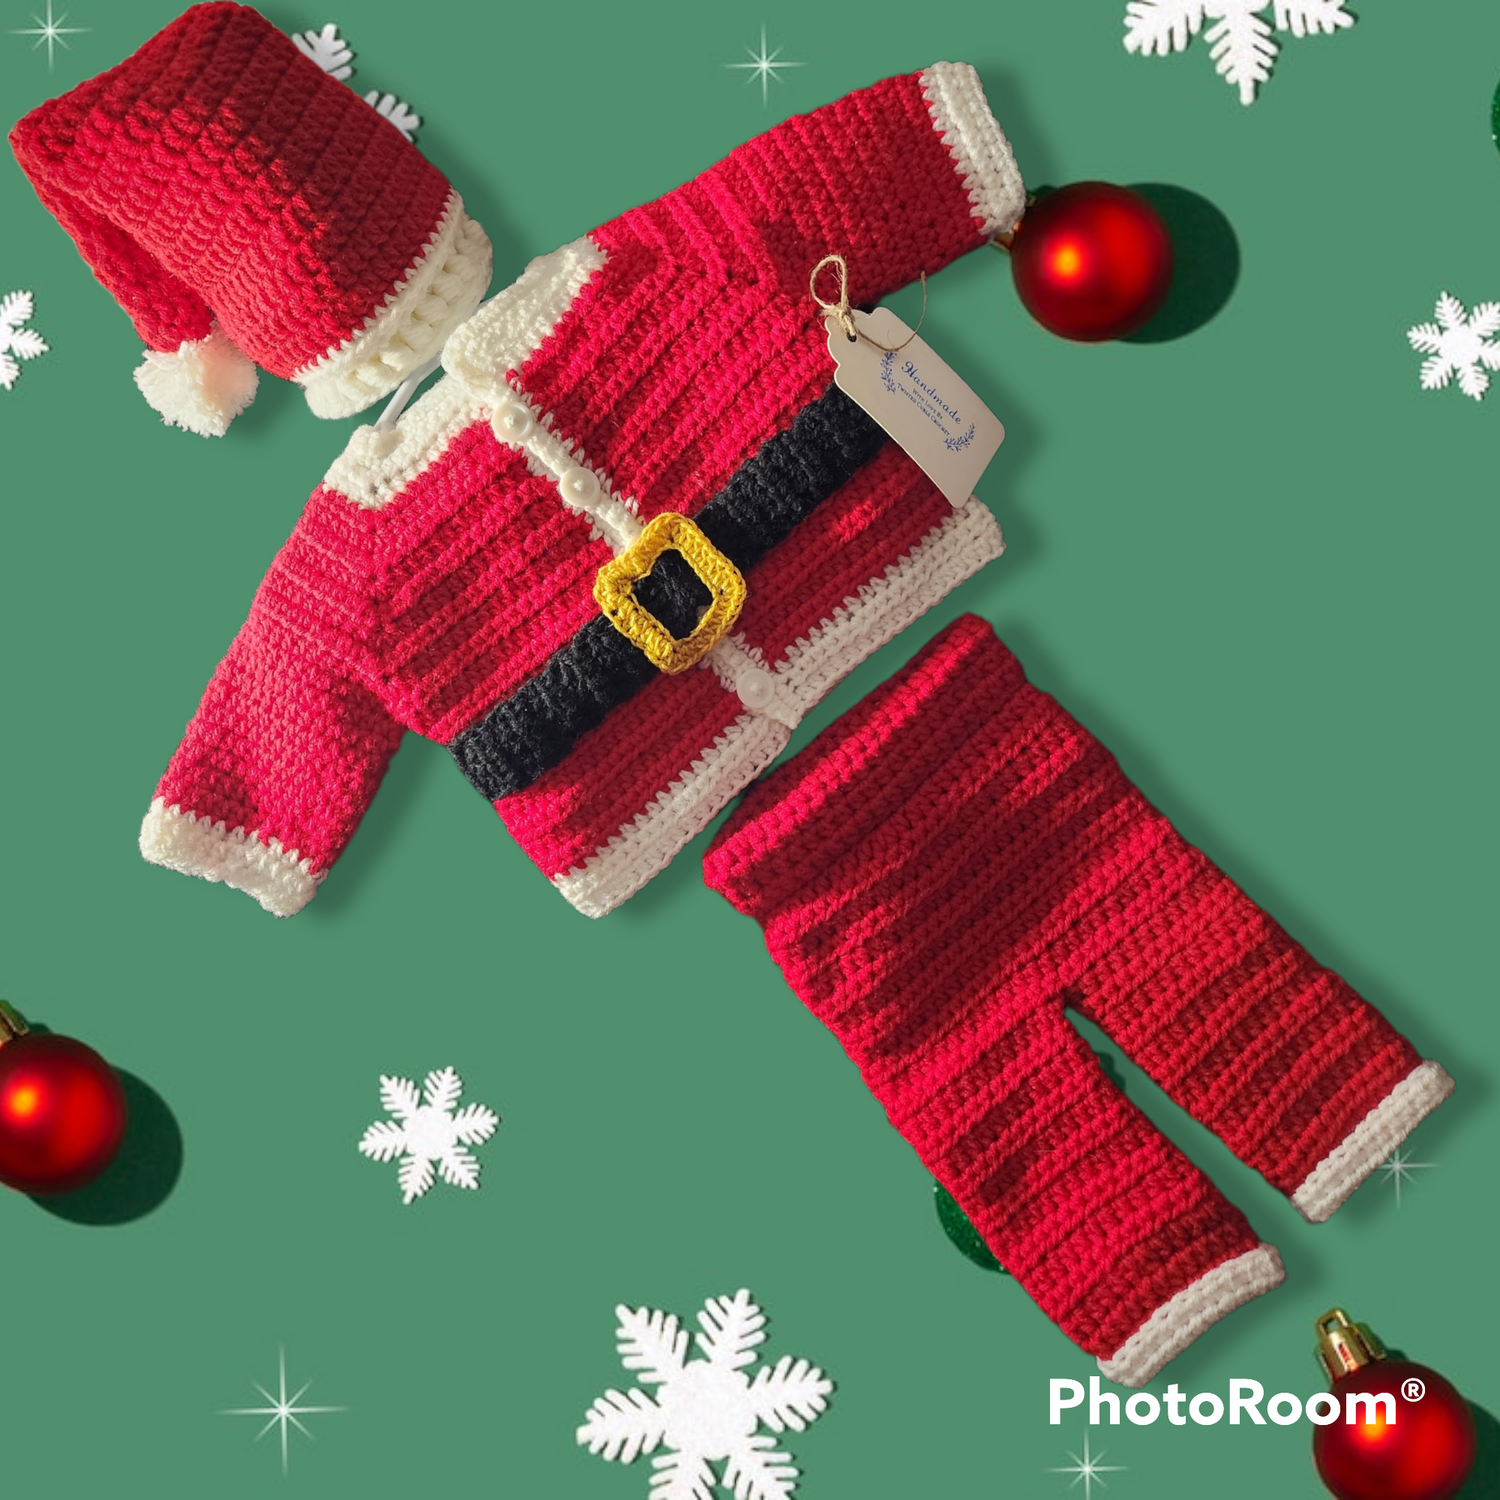 Christmas crocheted photo props